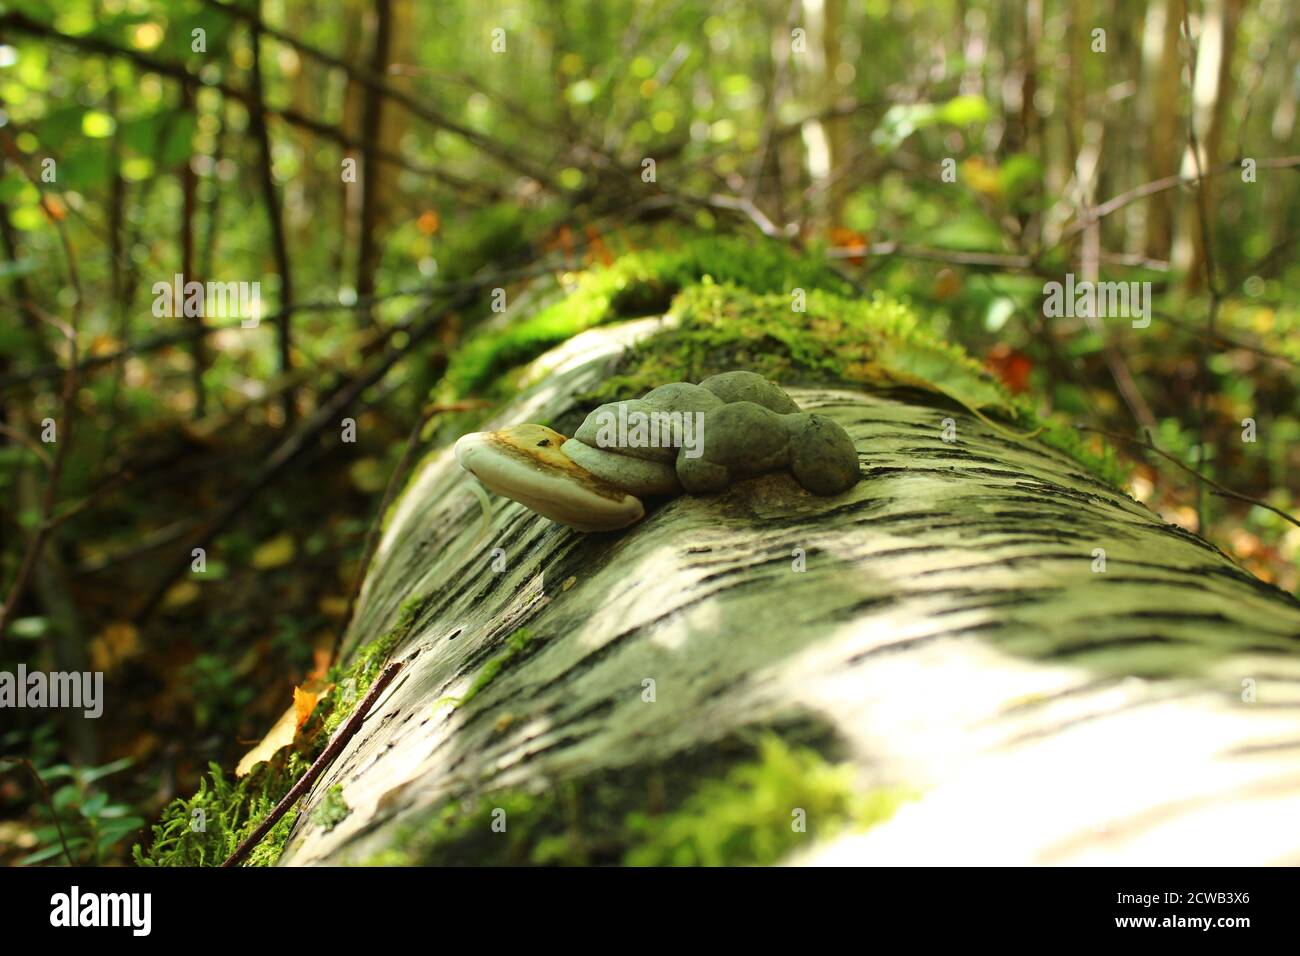 Small parasitic fungus growing on a fallen birch in the woods Stock Photo